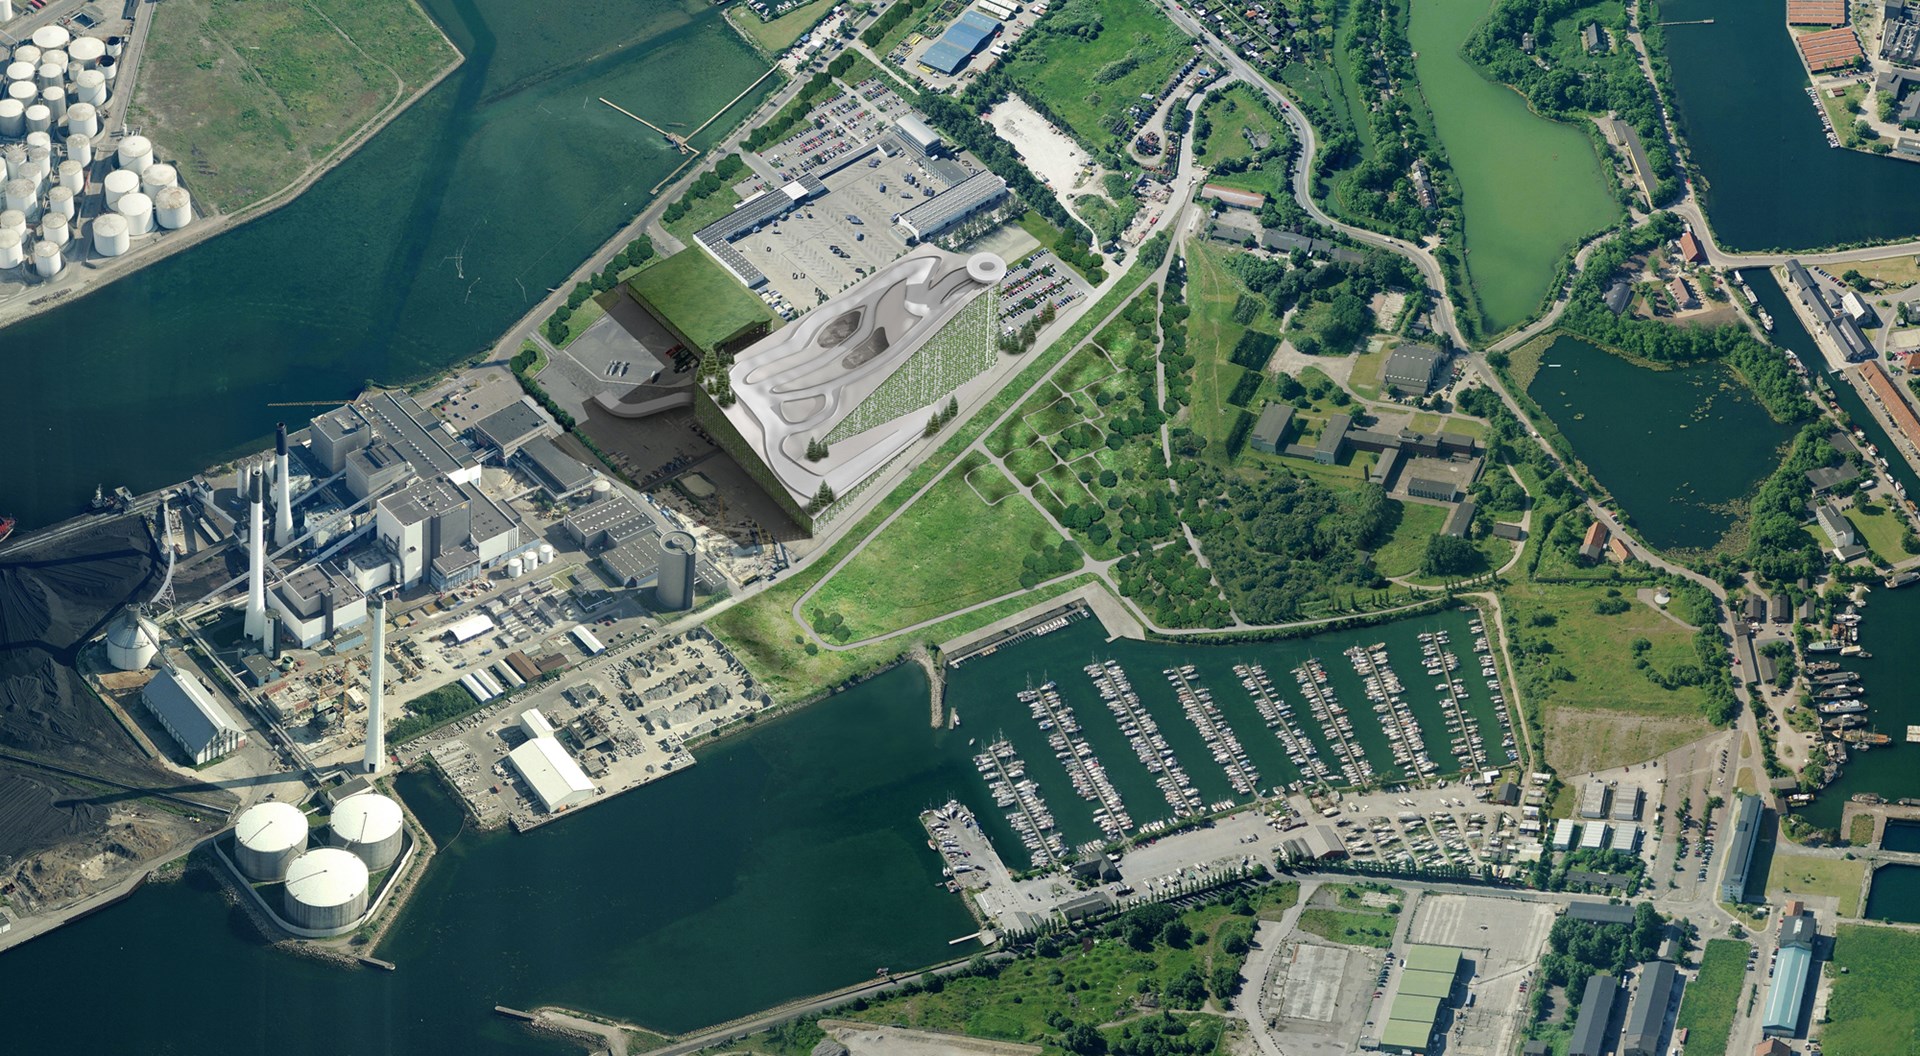 Illustration of Amager Bakke seen from the air.